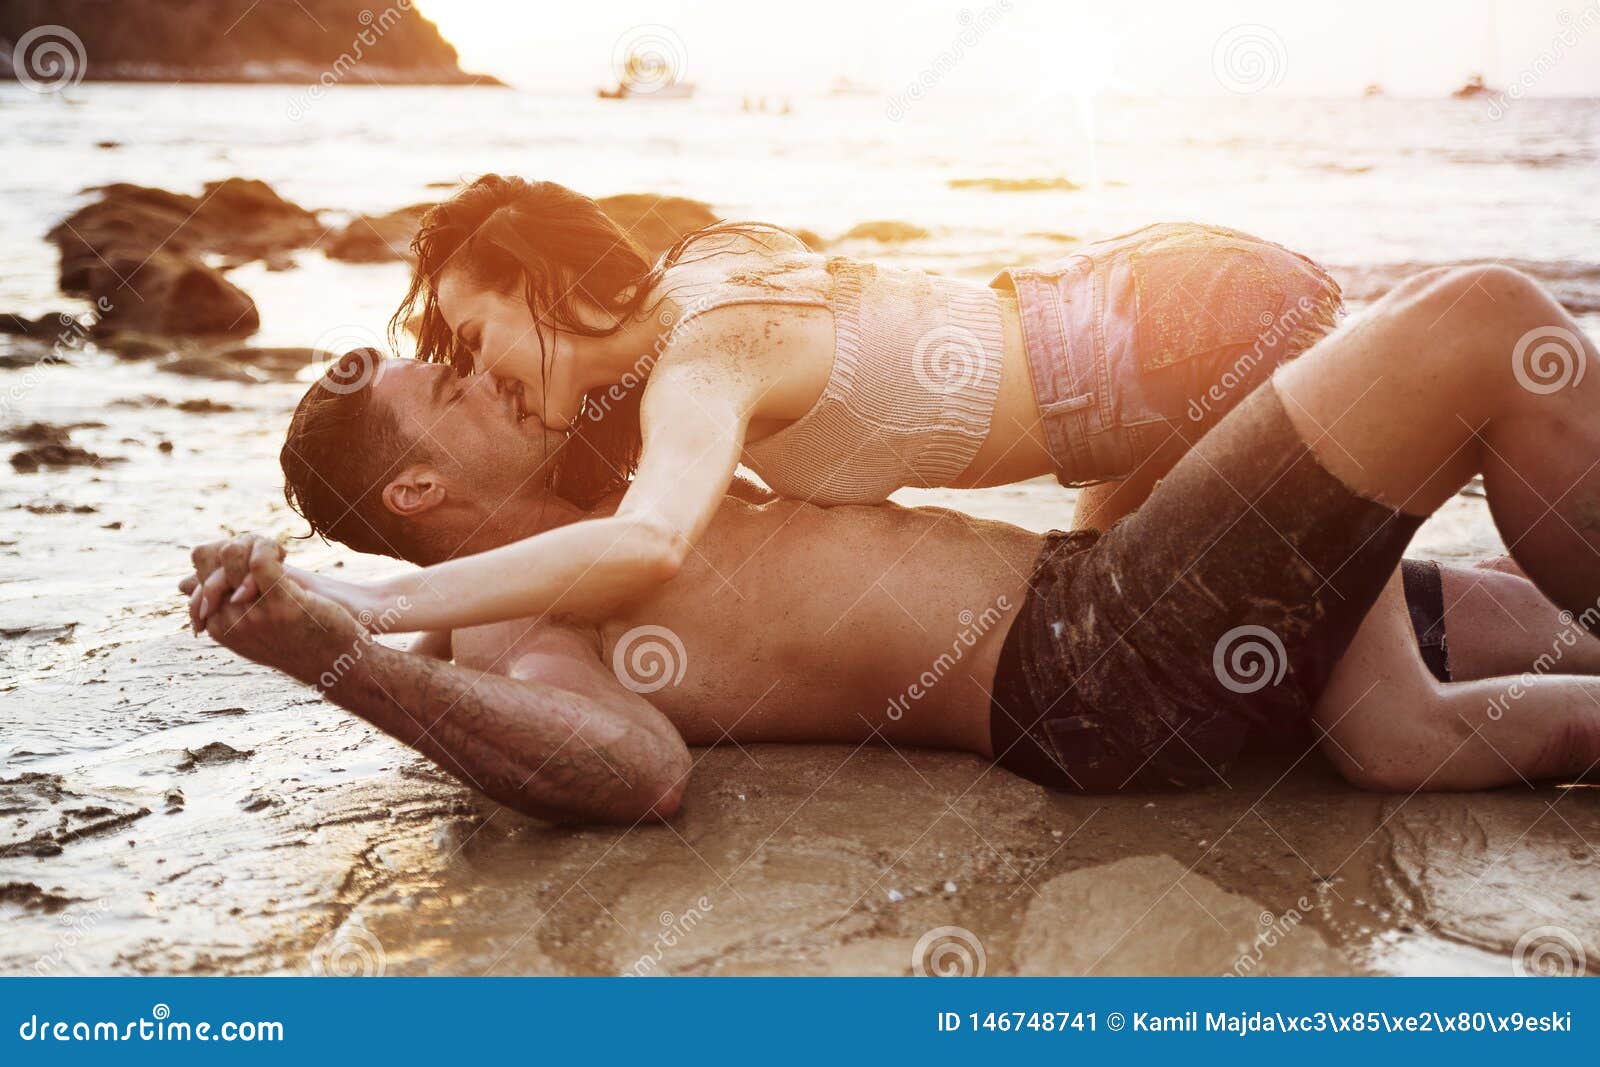 158 Romantic Couple Beach Swimsuit Beautiful Sexy Young People Stock Photos 